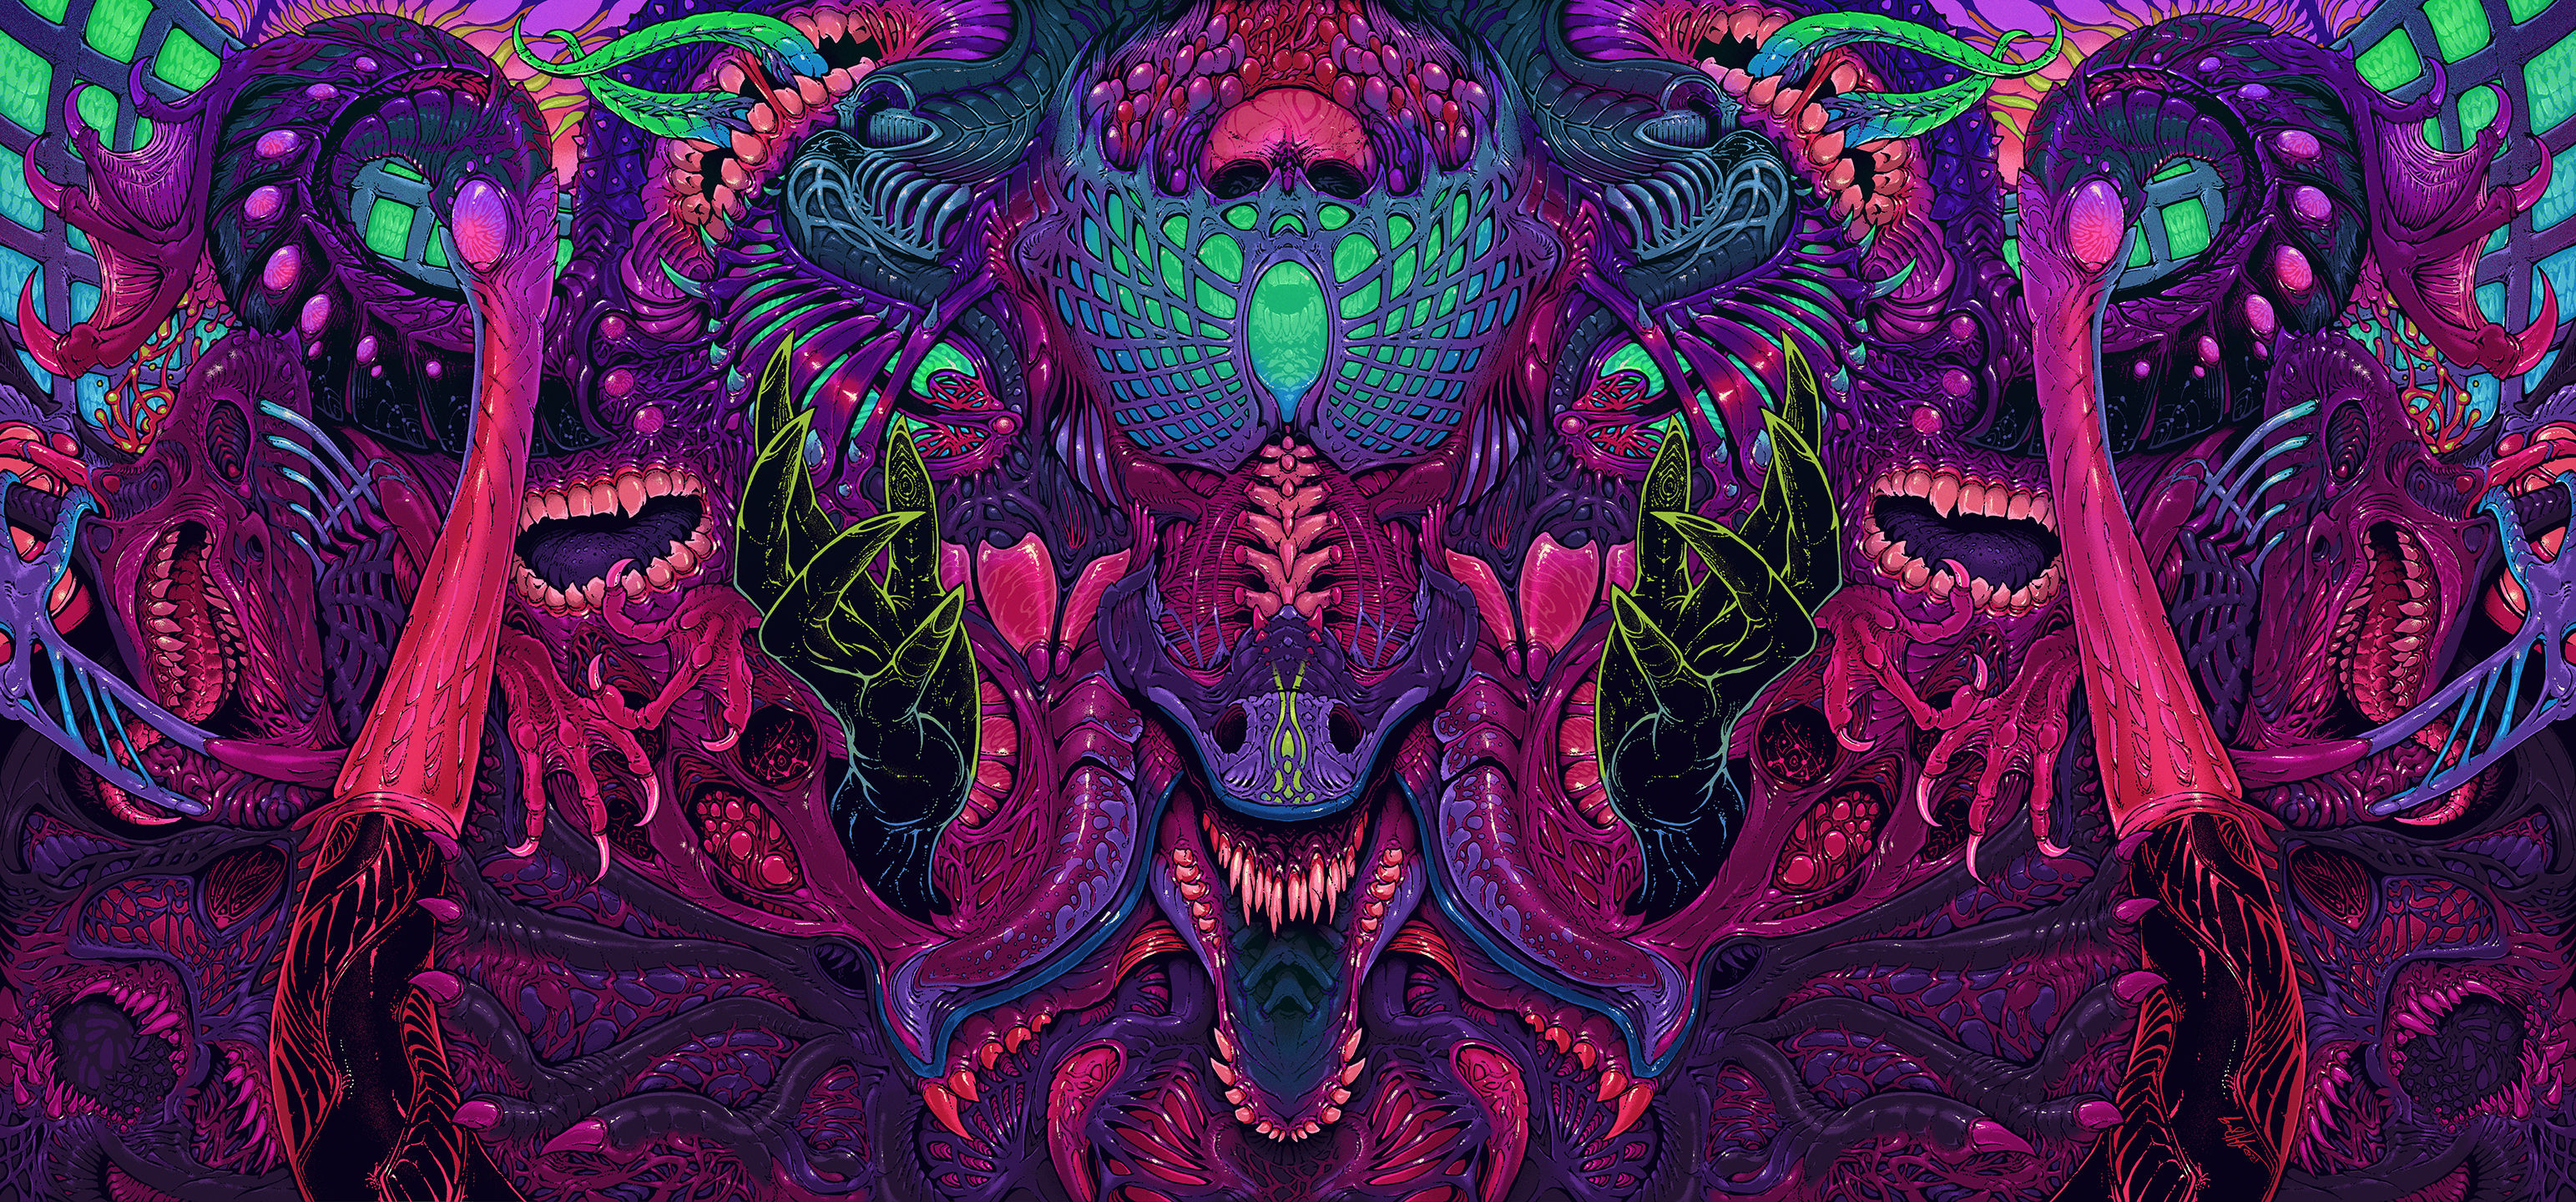 Psychedelic 3086x1440